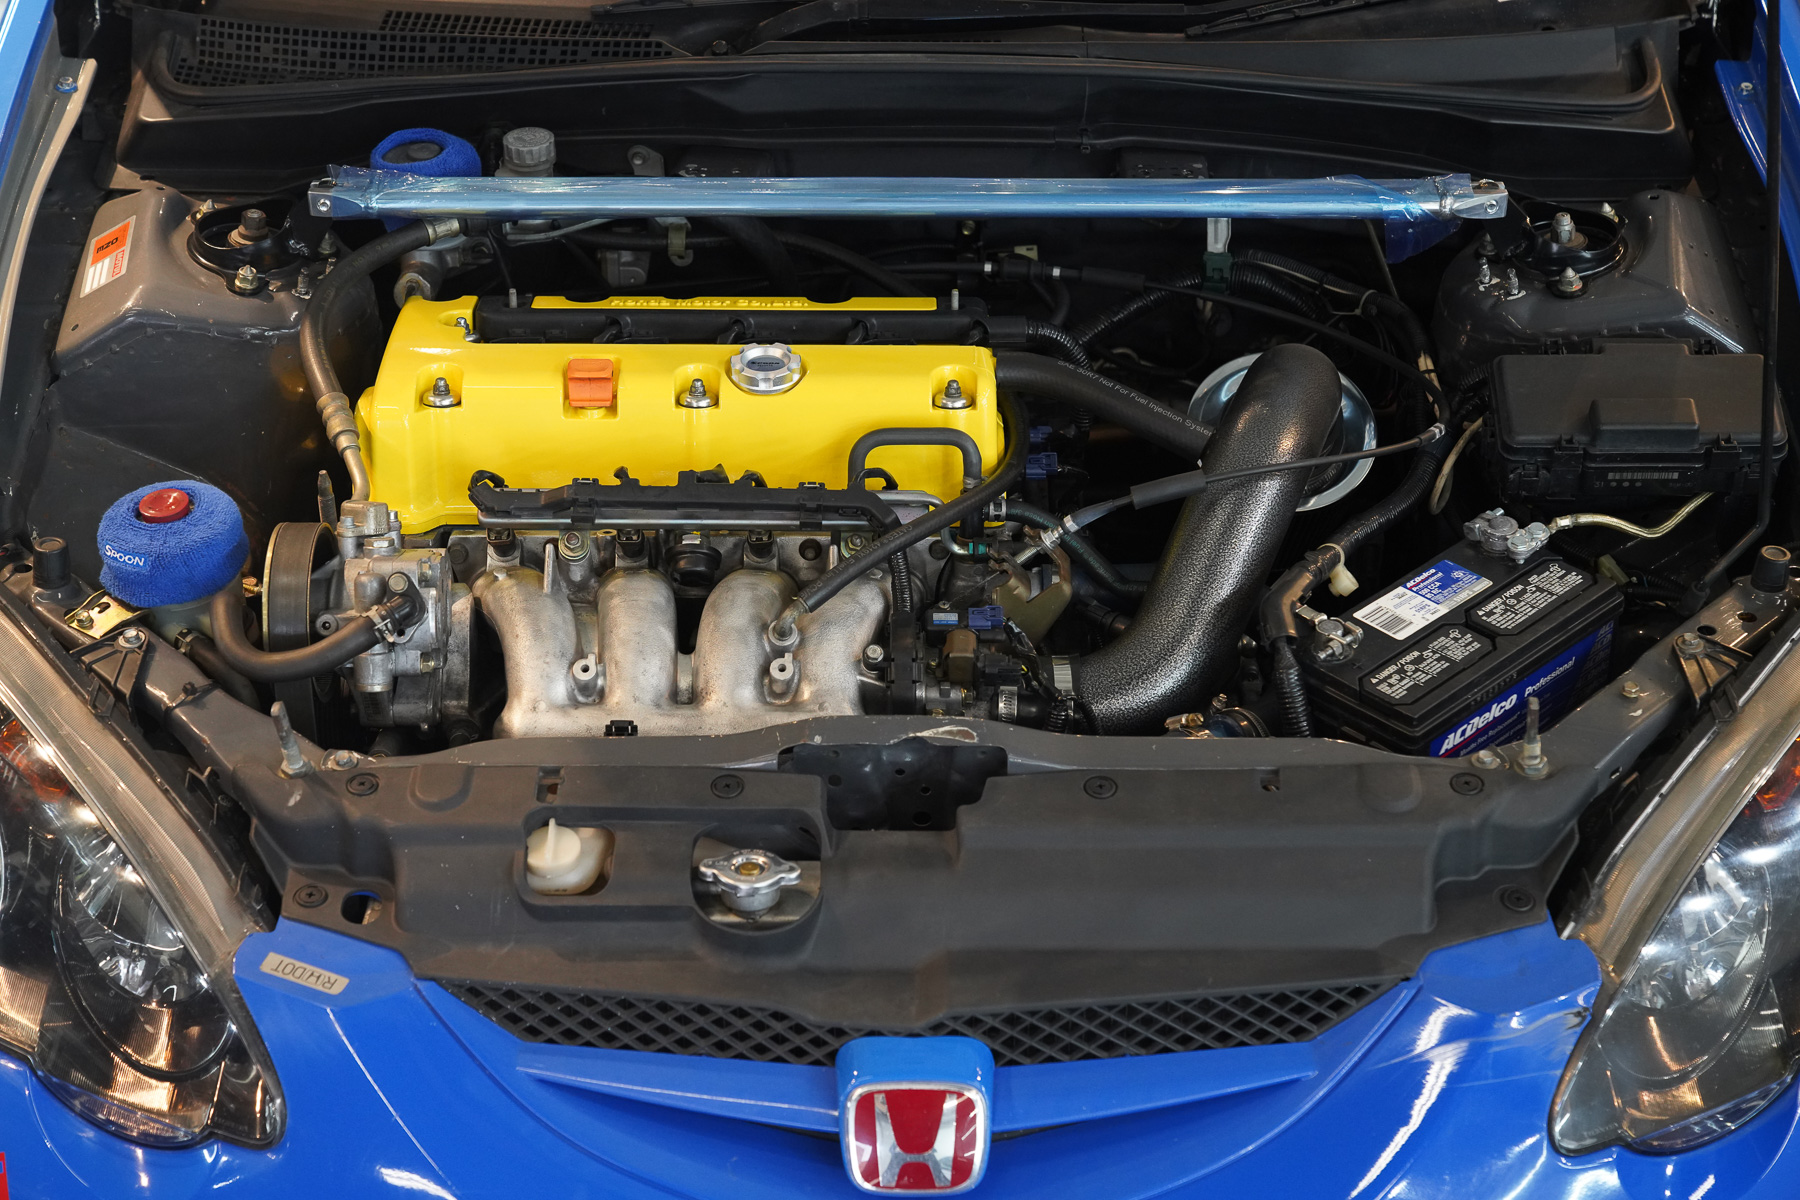 Spoon Race Car - Honda DC5 Integra Type R - Inspire USA - Engine Bay After Dry ice detailing